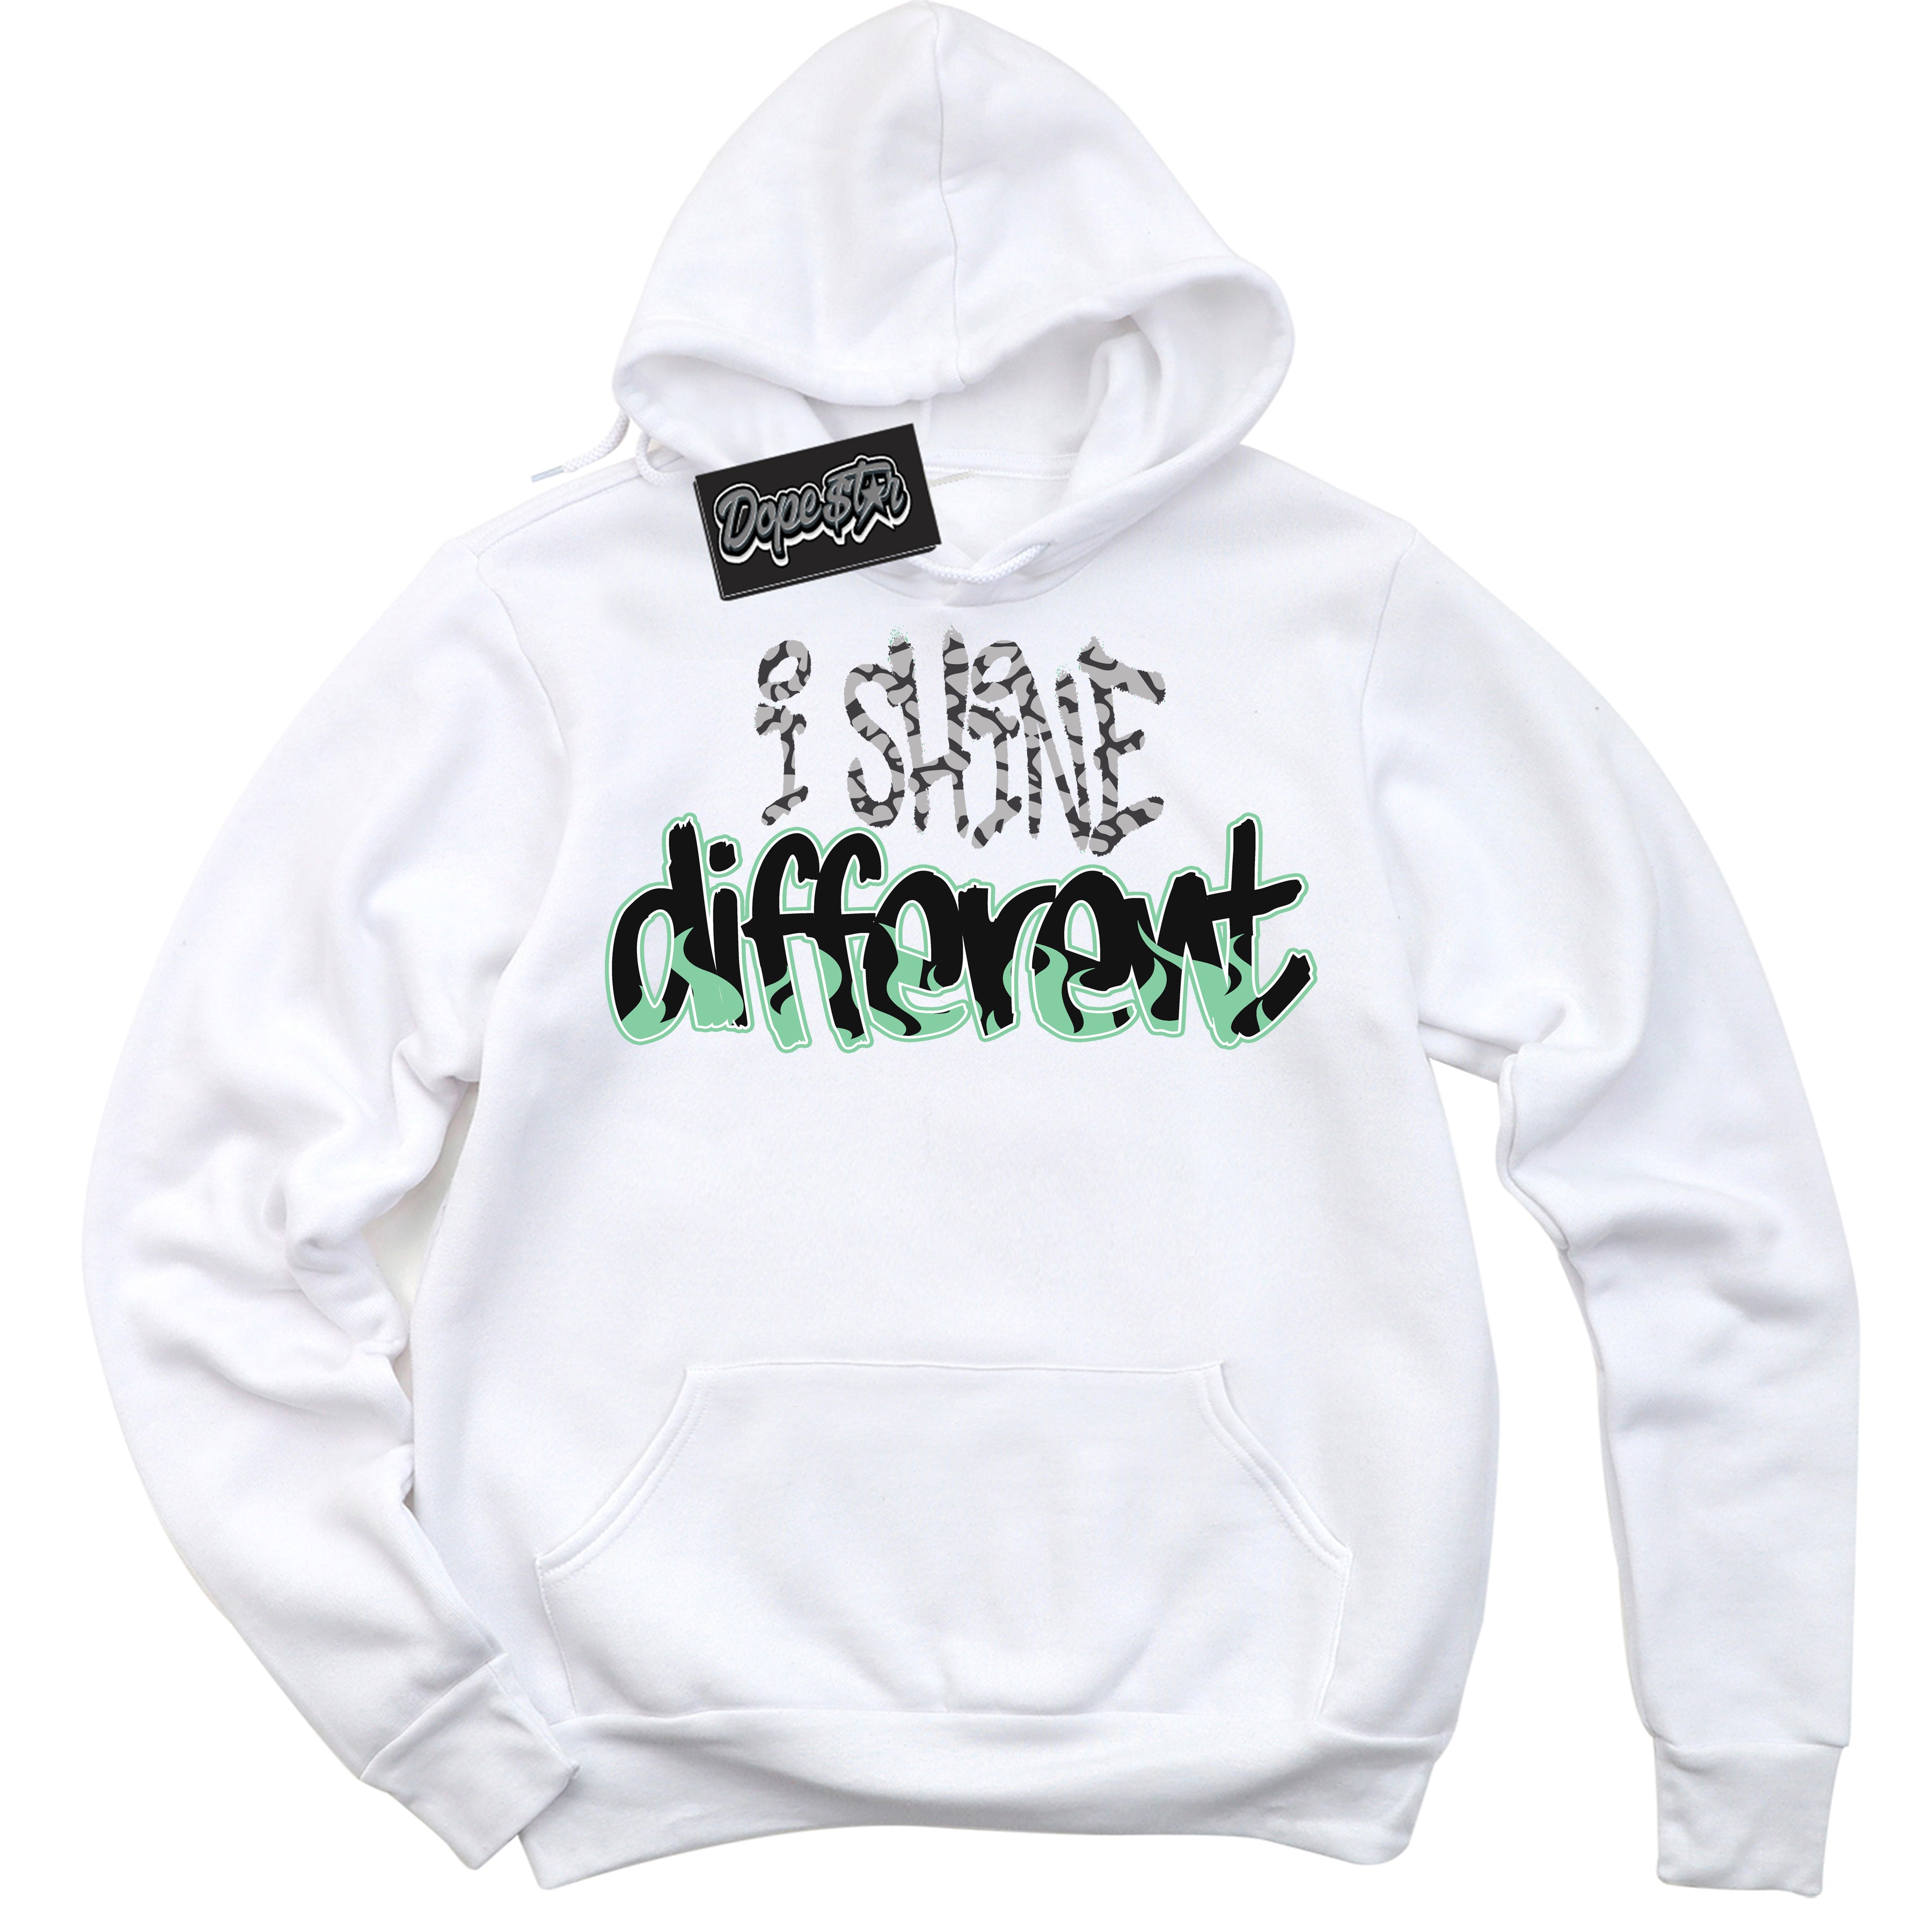 Cool White Graphic DopeStar Hoodie with “ I Shine Different “ print, that perfectly matches Green Glow 3s sneakers